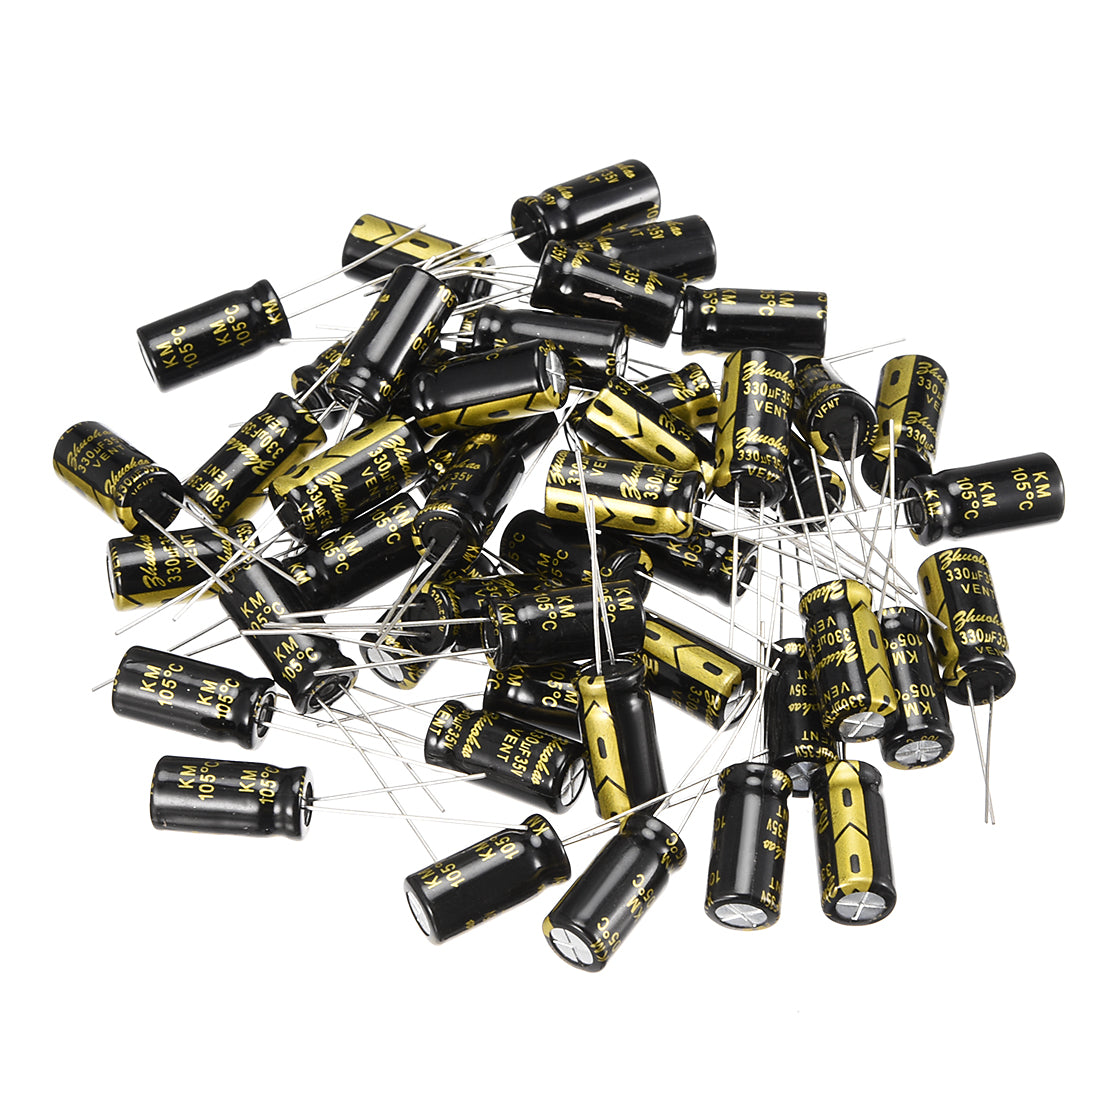 uxcell Uxcell Aluminum Radial Electrolytic Capacitor with 330uF 35V 105 Celsius Life 2000H 8 x 16 mm Black 50pcs